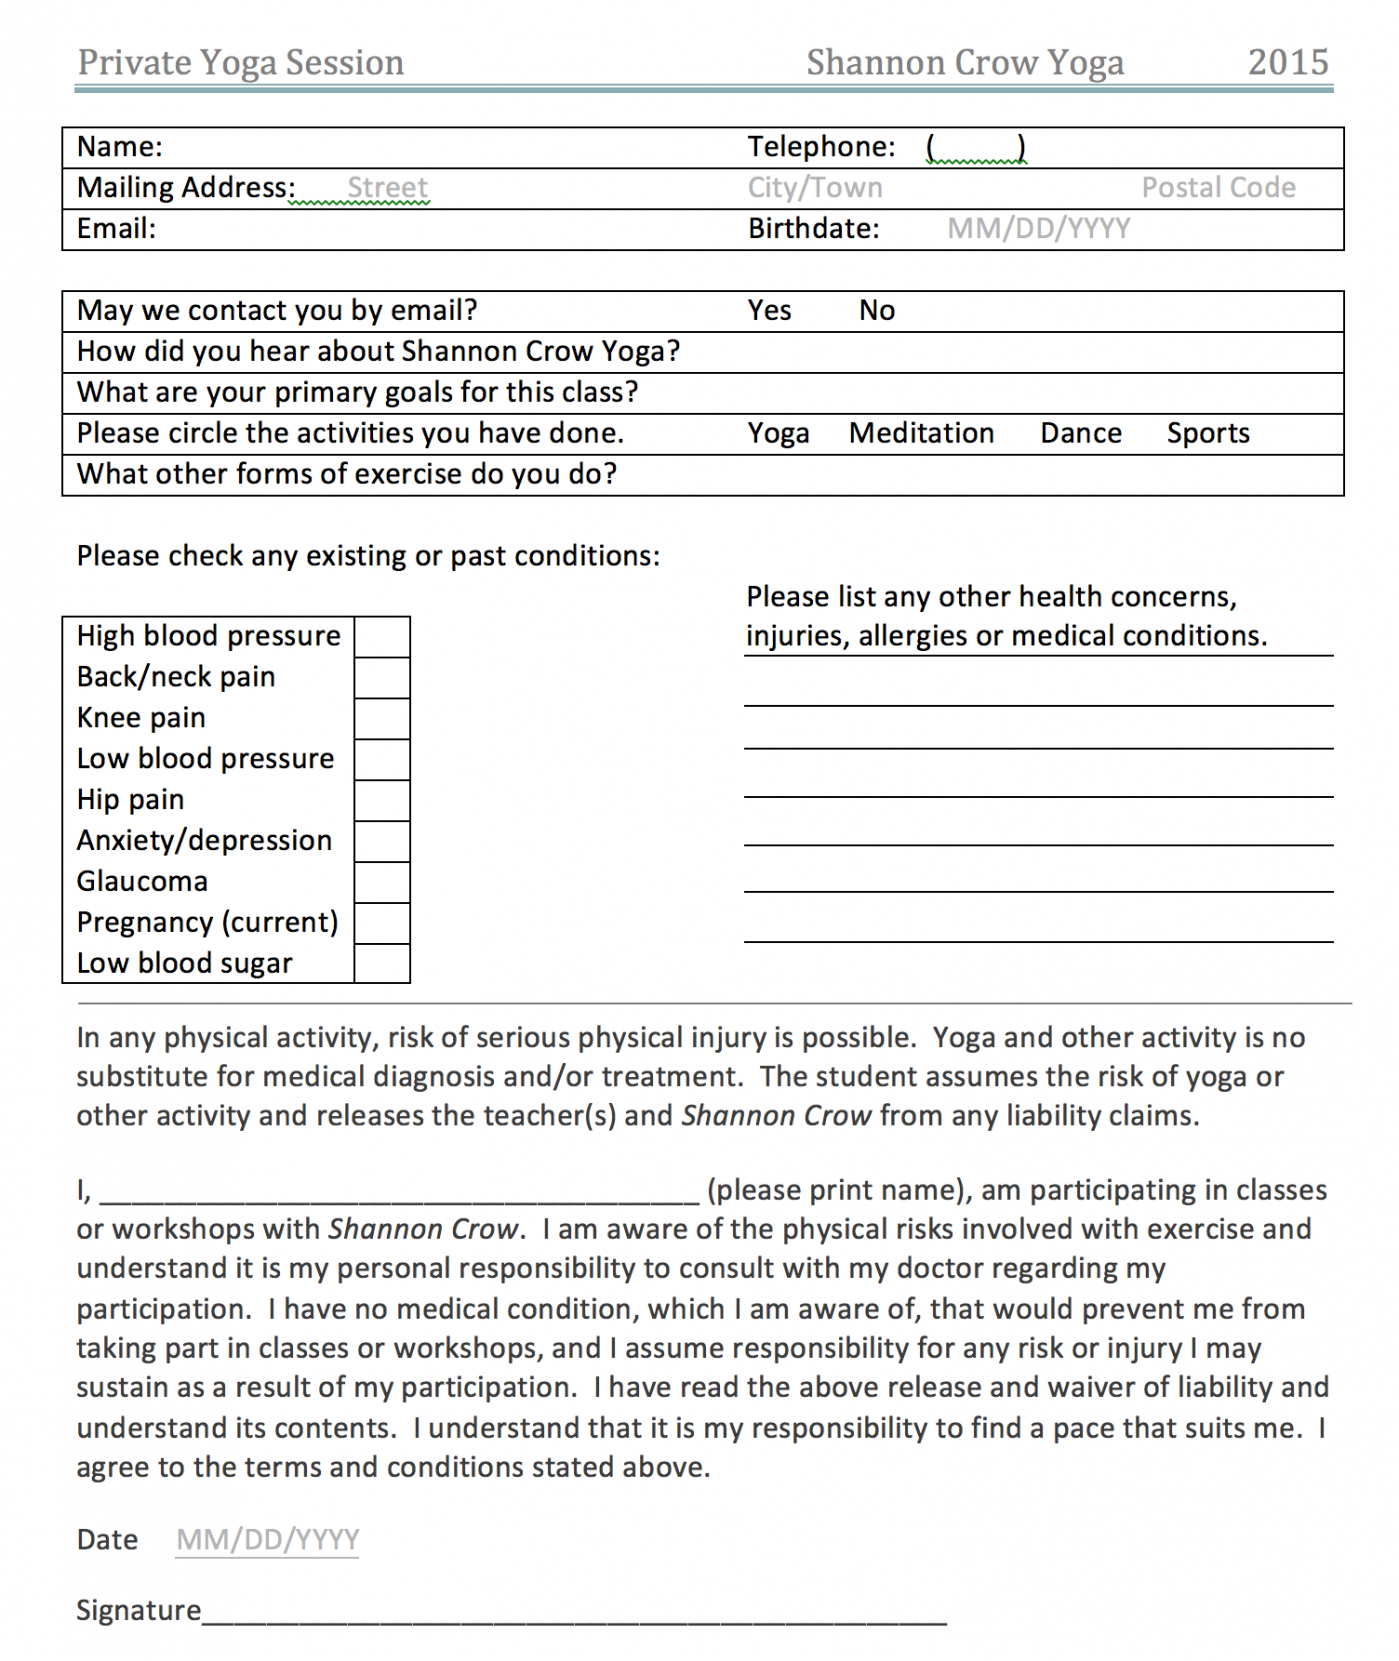 private yoga class waiver form  shannon crow yoga release form template doc